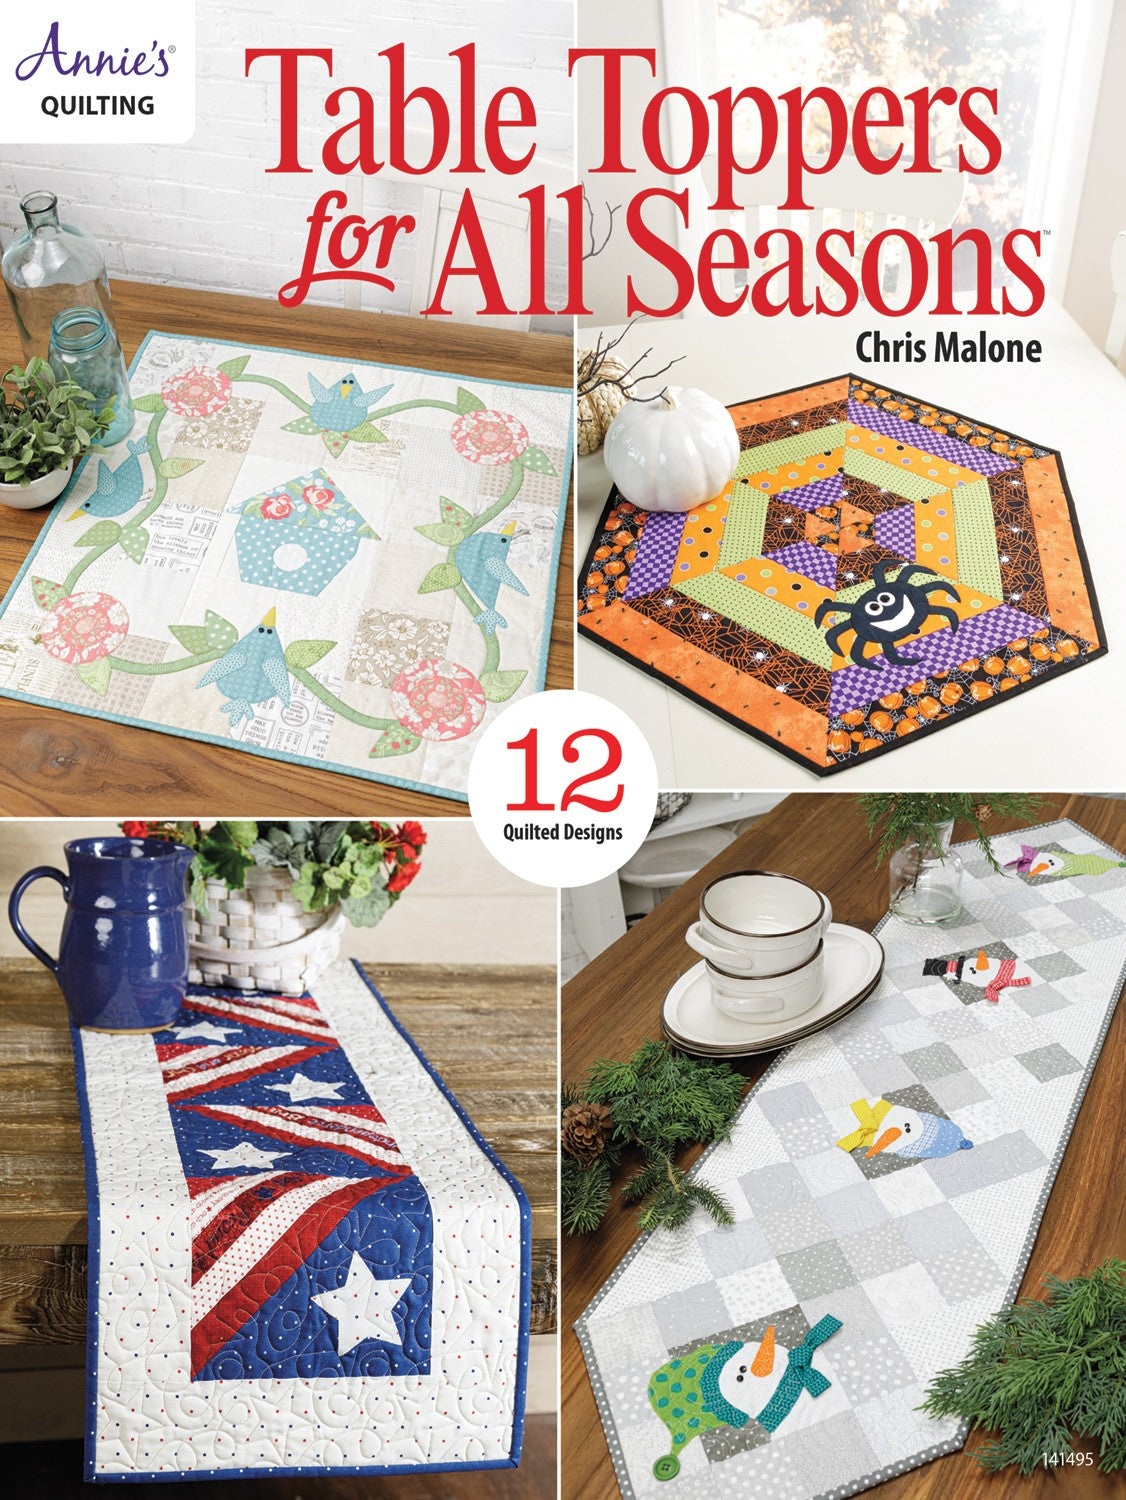 Table Toppers for all Seasons - Chris Malone